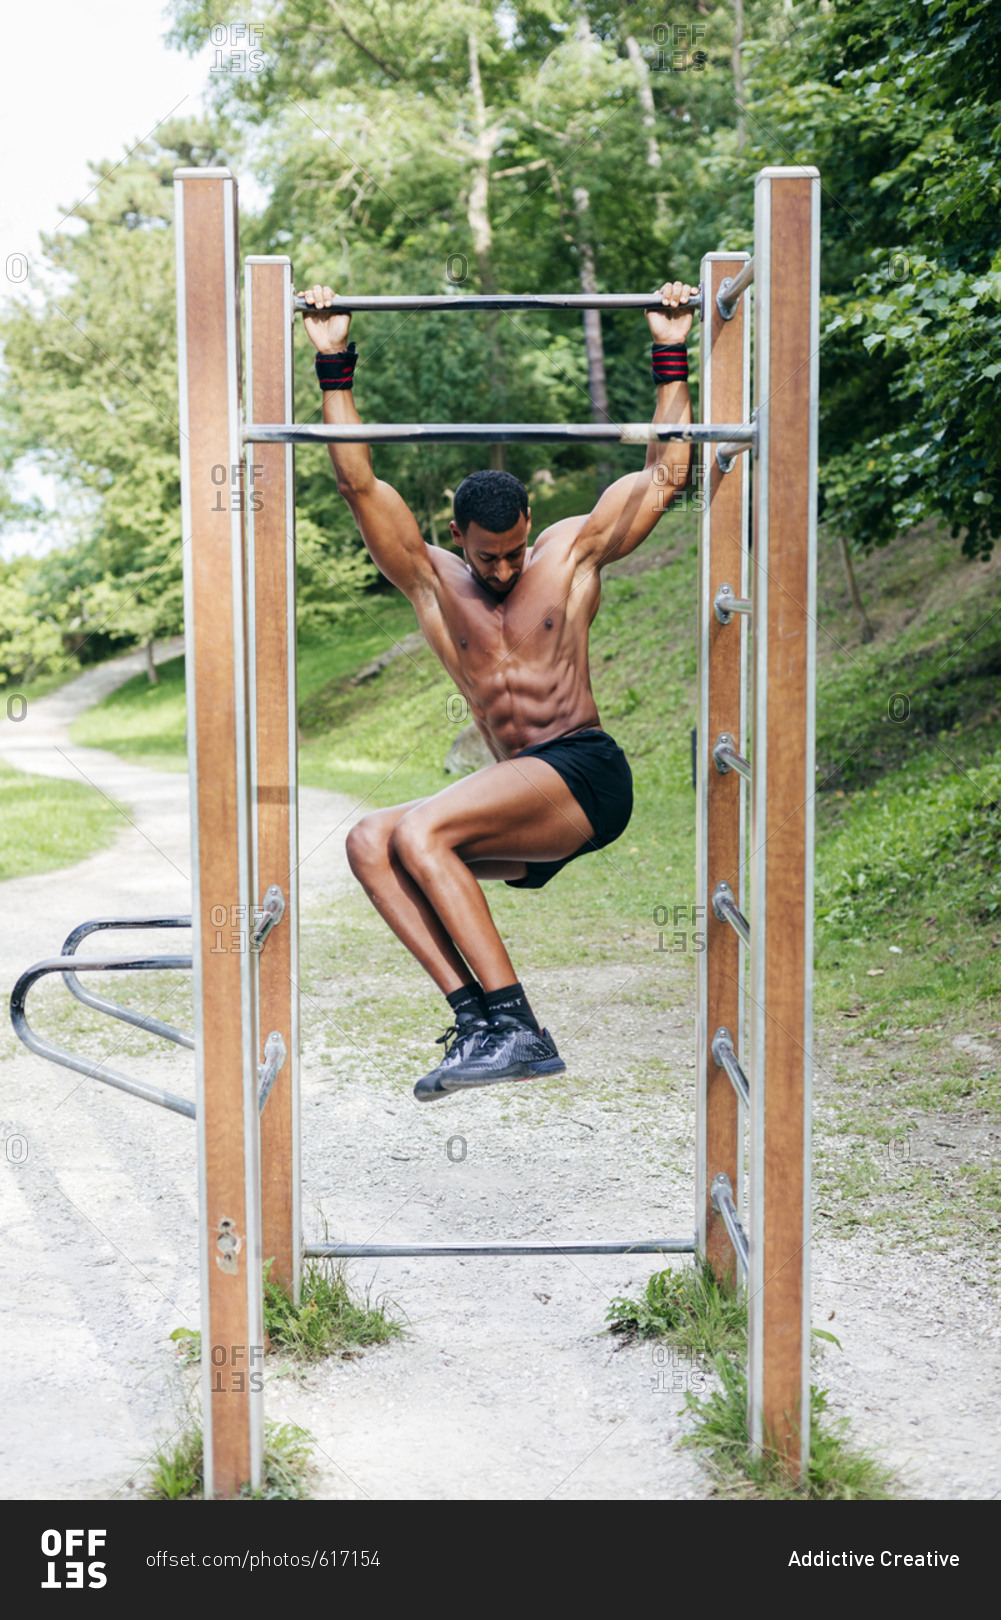 Shirtless muscular black man exercising and doing workout on bar in the park.